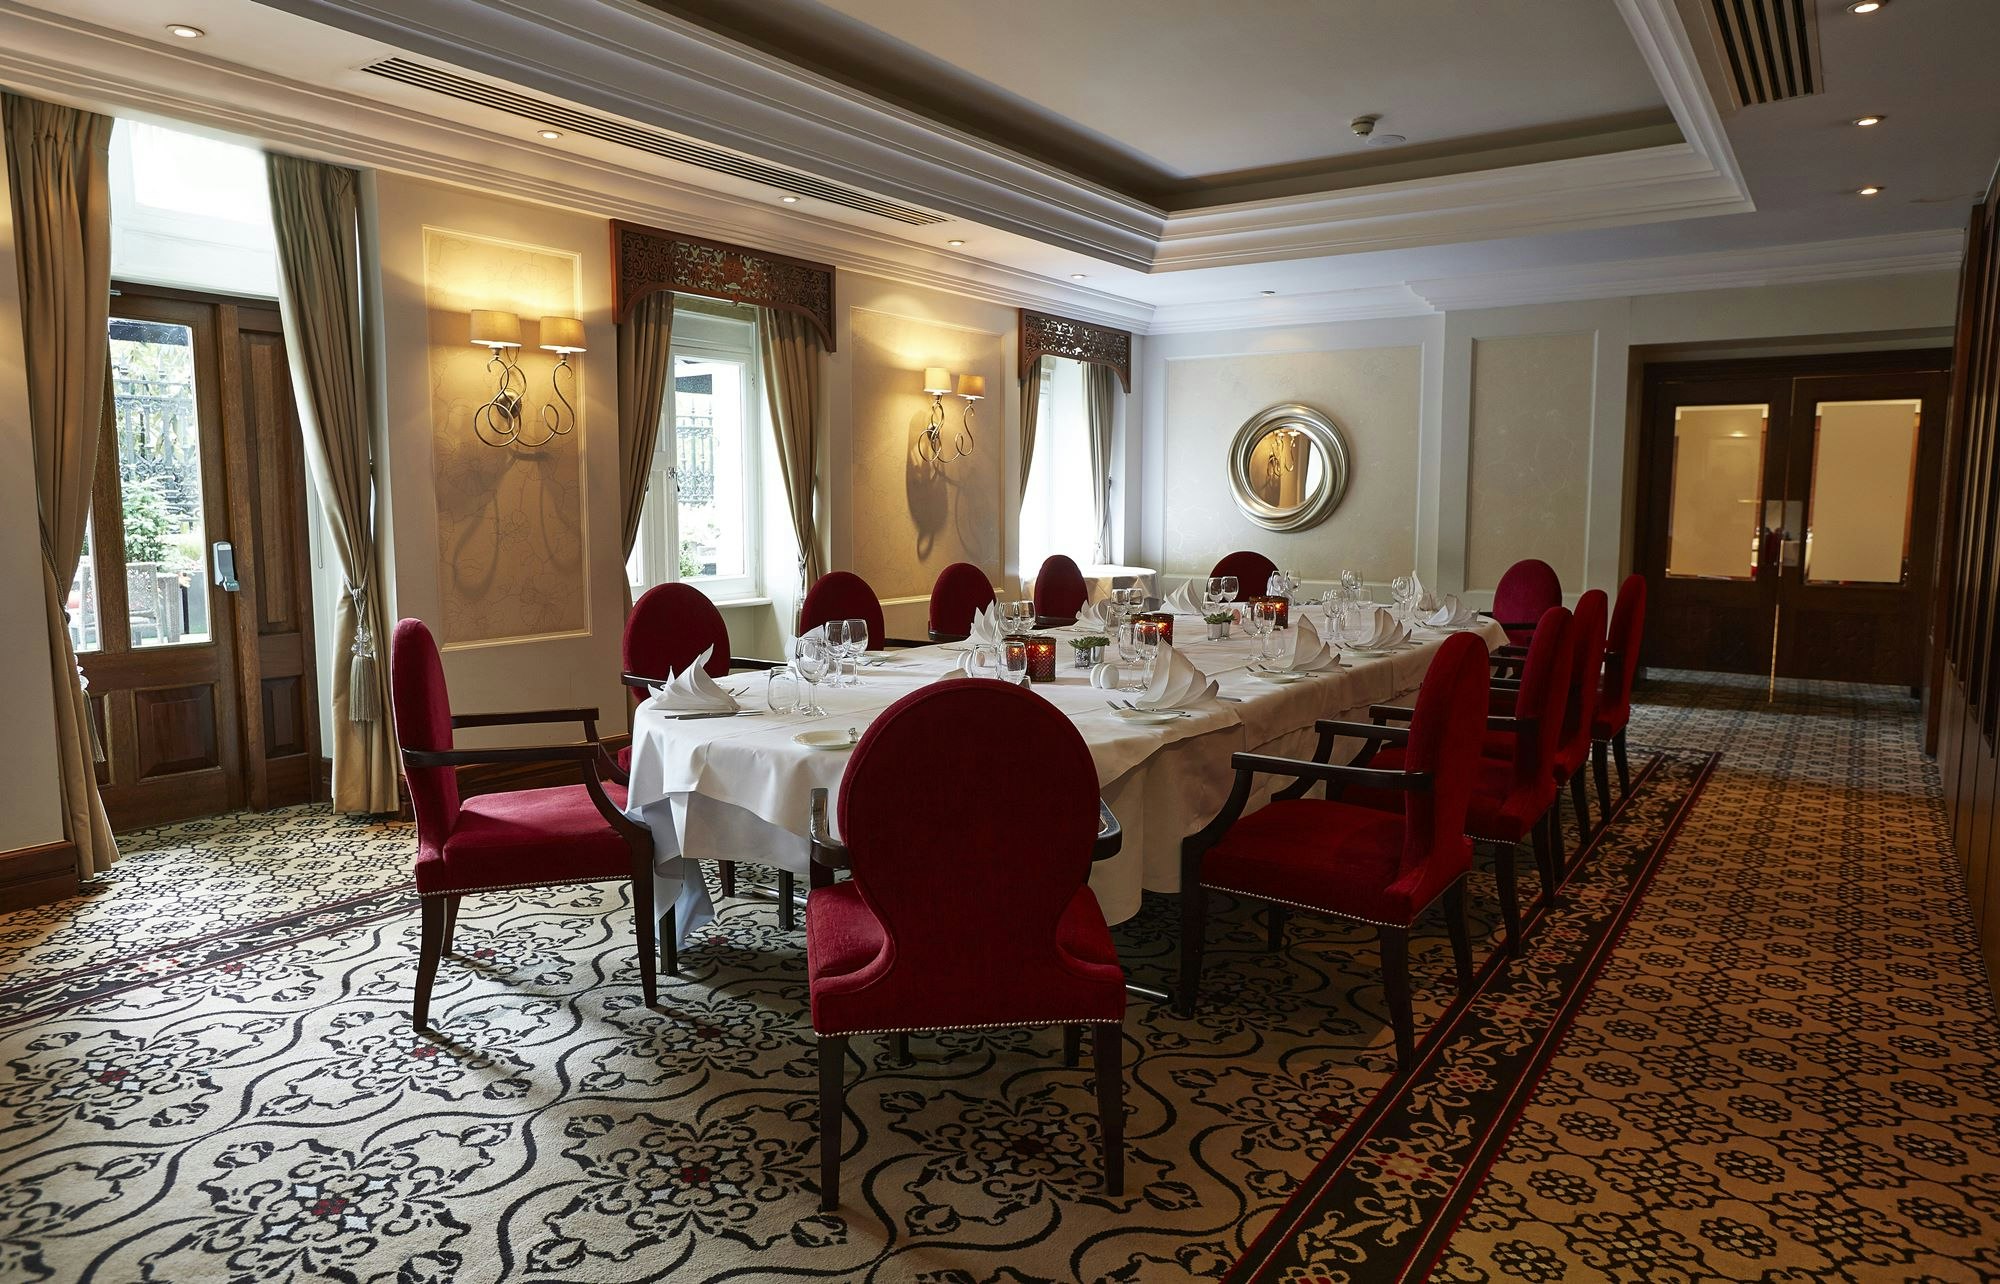 The Royal Horseguards Hotel and One Whitehall Place - The Terrace Room image 1